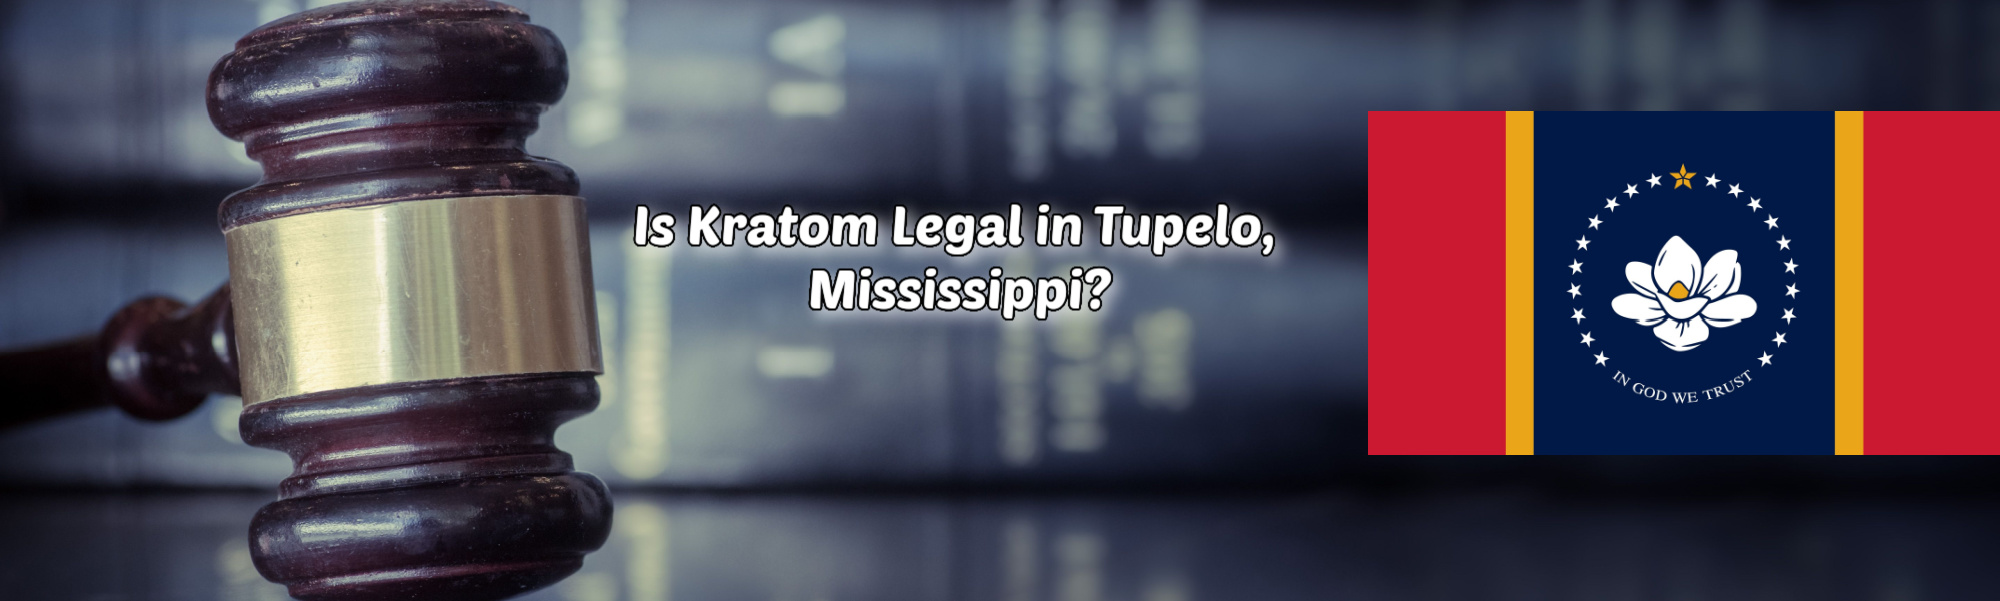 Best Places to Buy Kratom in Tupelo, Mississippi